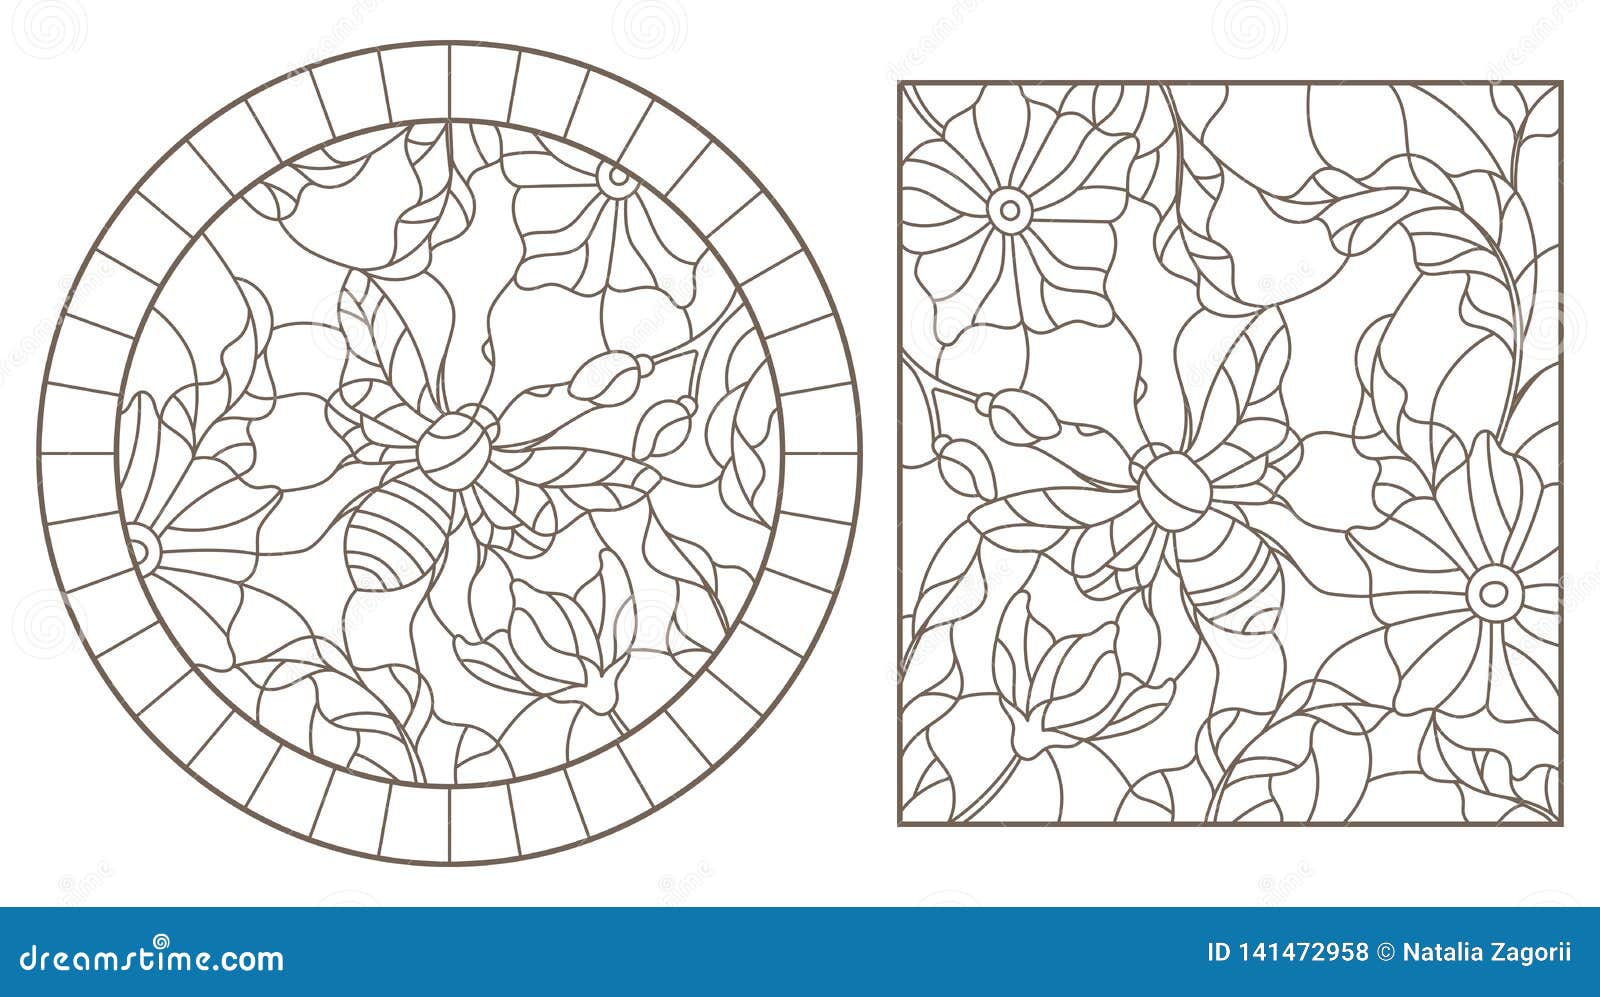 contour set with s of stained glass windows with bees and flowers, round and rectangular images